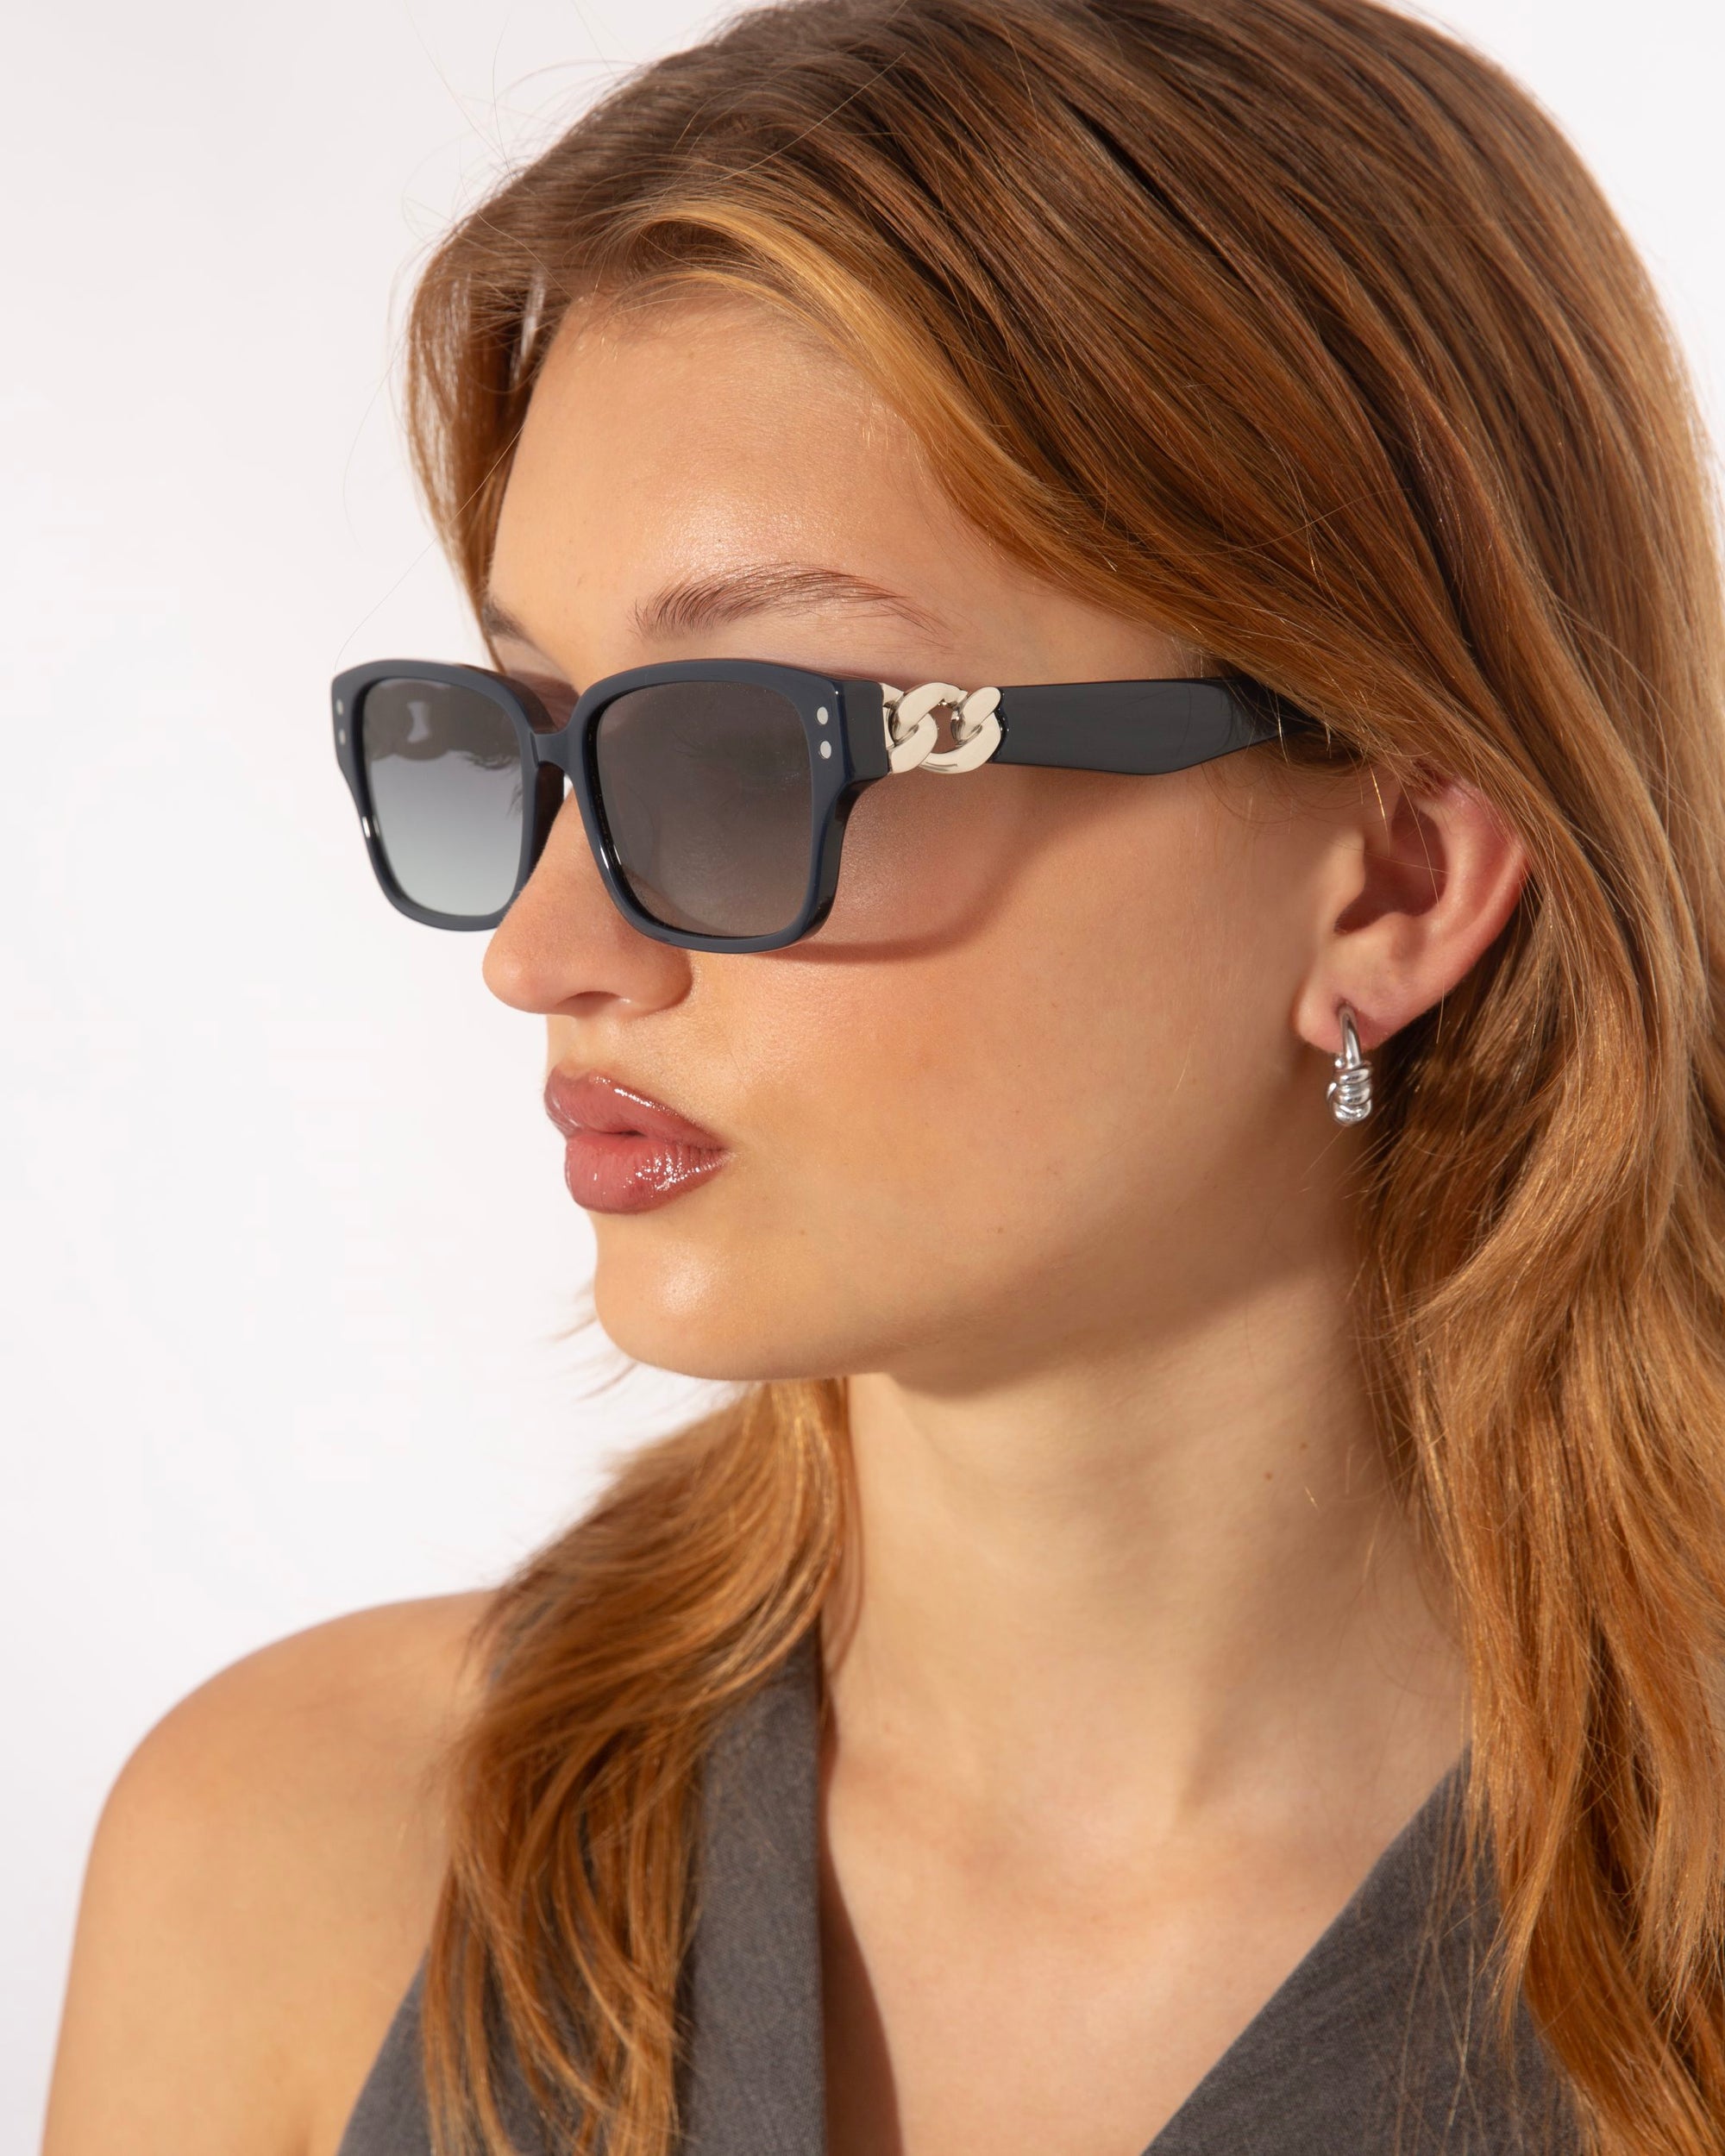 A person with long, light brown hair is wearing black Zenith sunglasses by For Art&#39;s Sake® with a small decorative chain on the sides, capturing &#39;90s styles. They have a pair of drop earrings and are looking slightly to the left. The background is plain white.